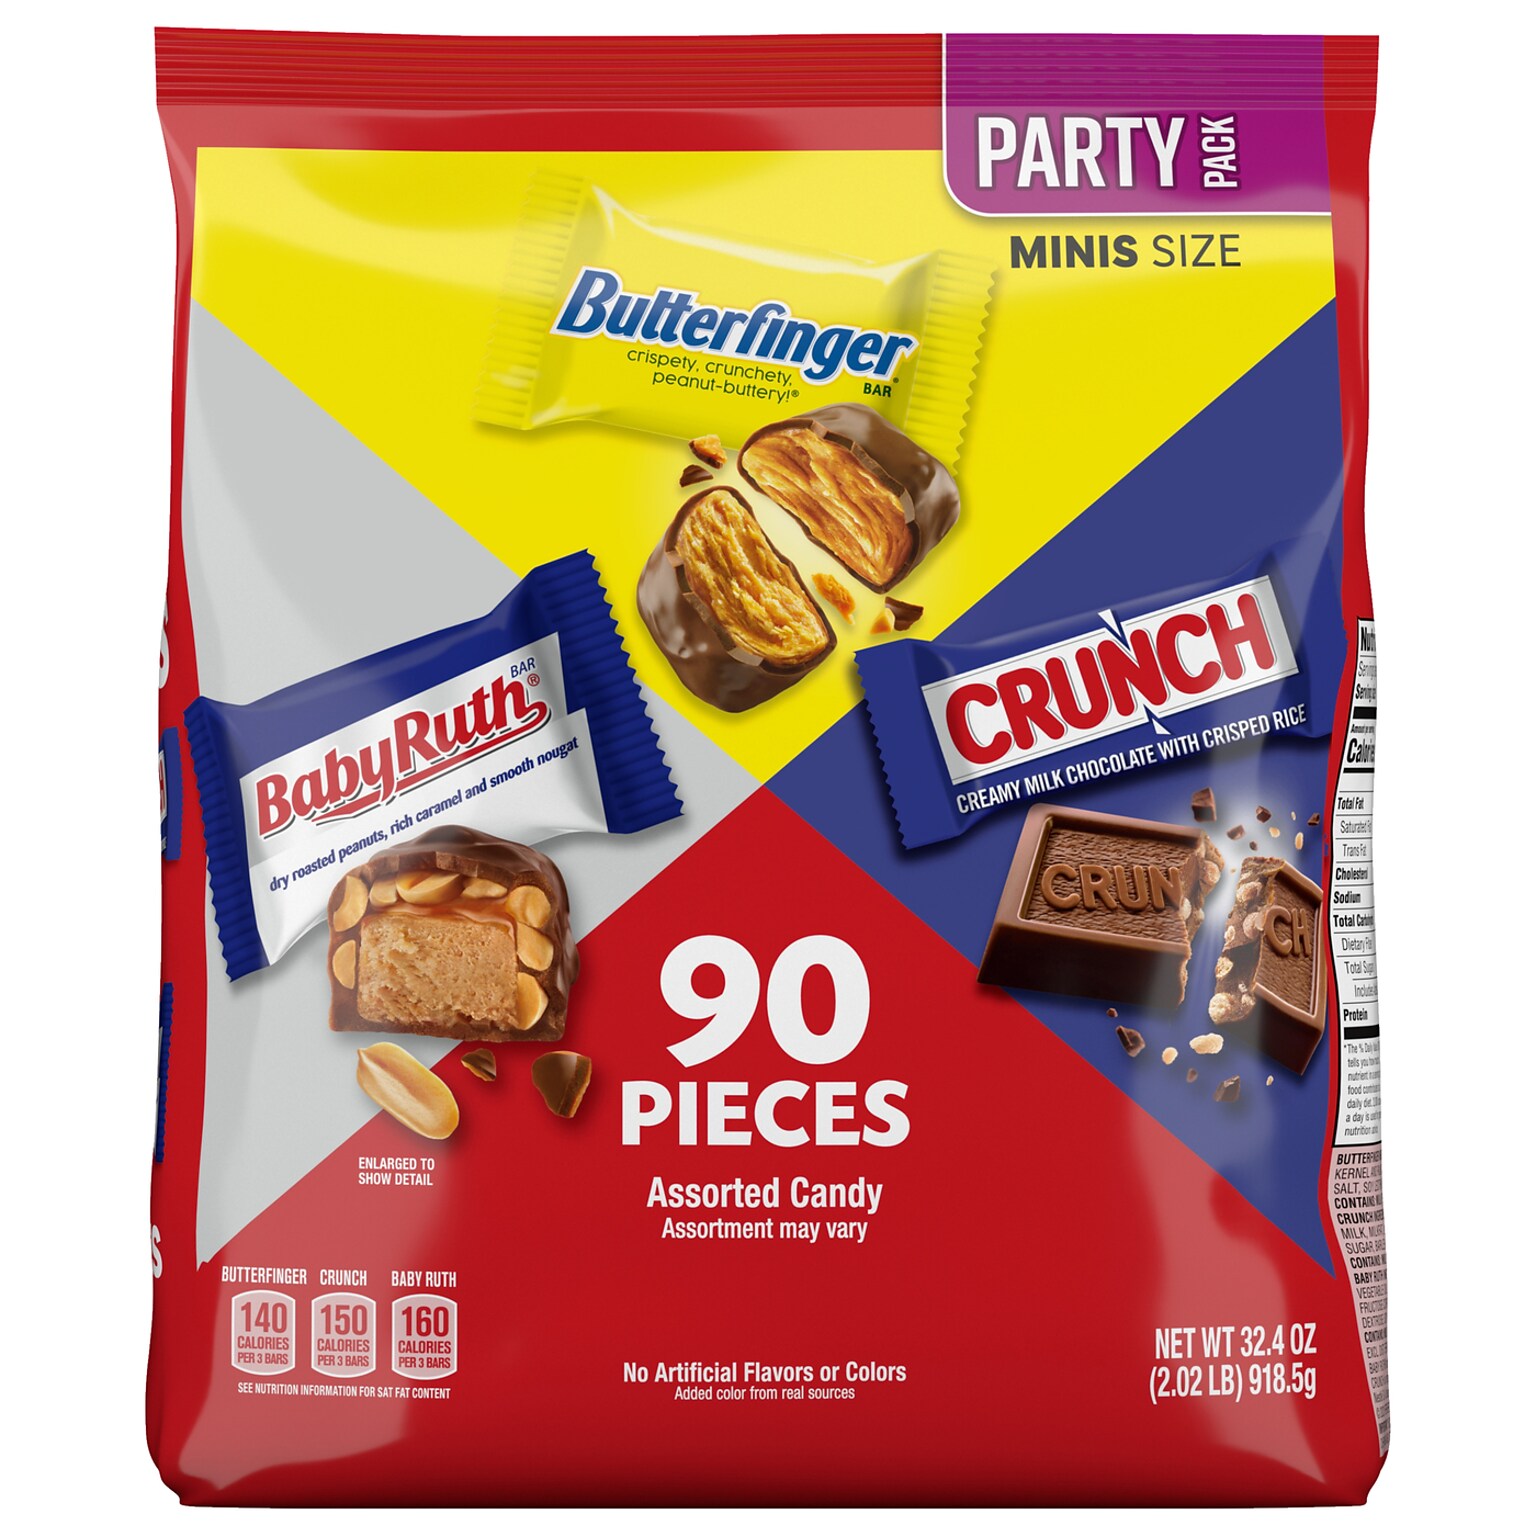 Ferrero Butterfinger, CRUNCH, and Baby Ruth Assorted Minis Candy Bars, 90ct, 32.4oz